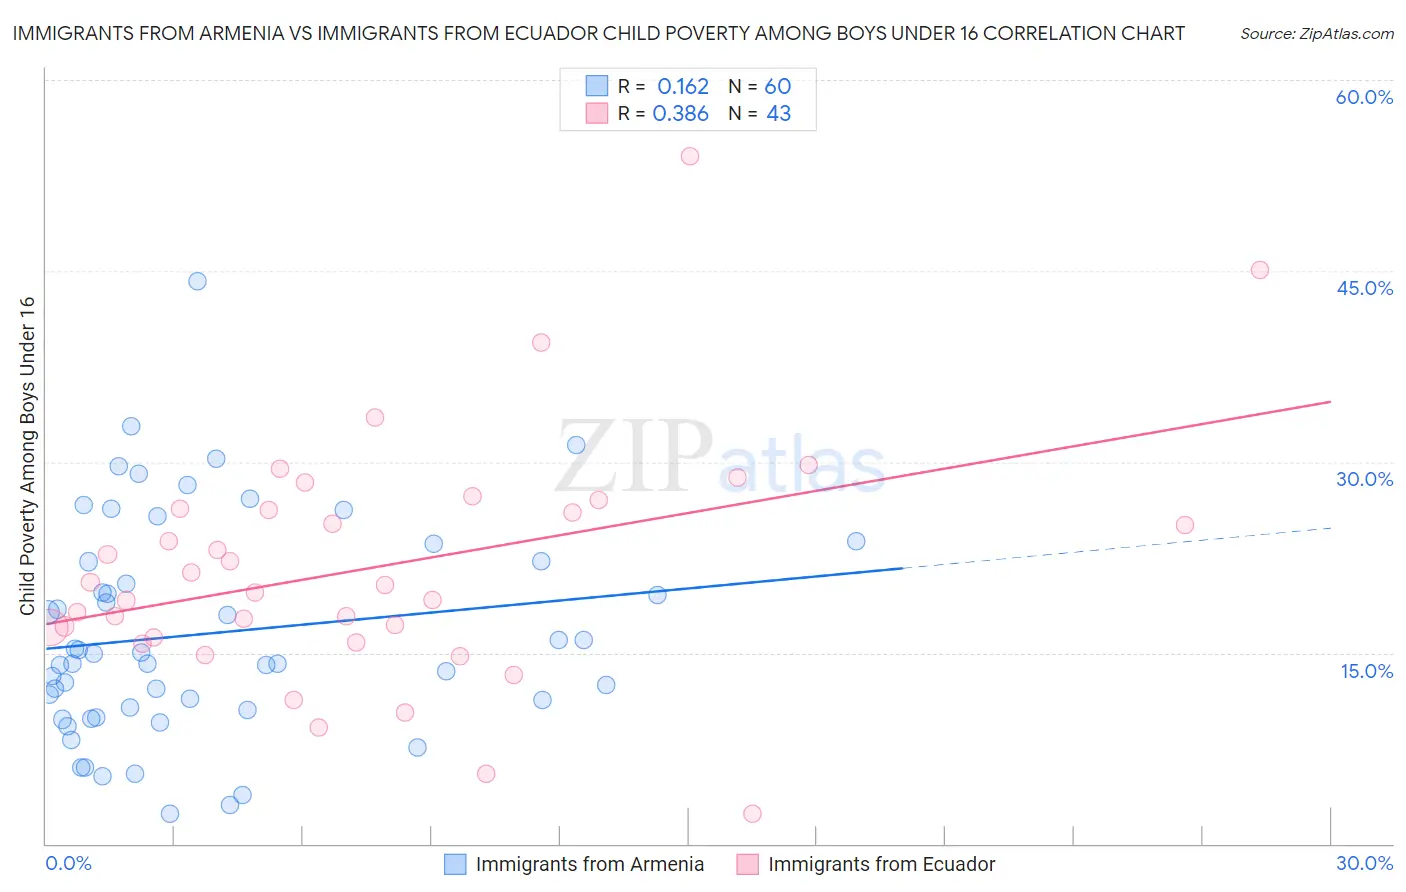 Immigrants from Armenia vs Immigrants from Ecuador Child Poverty Among Boys Under 16